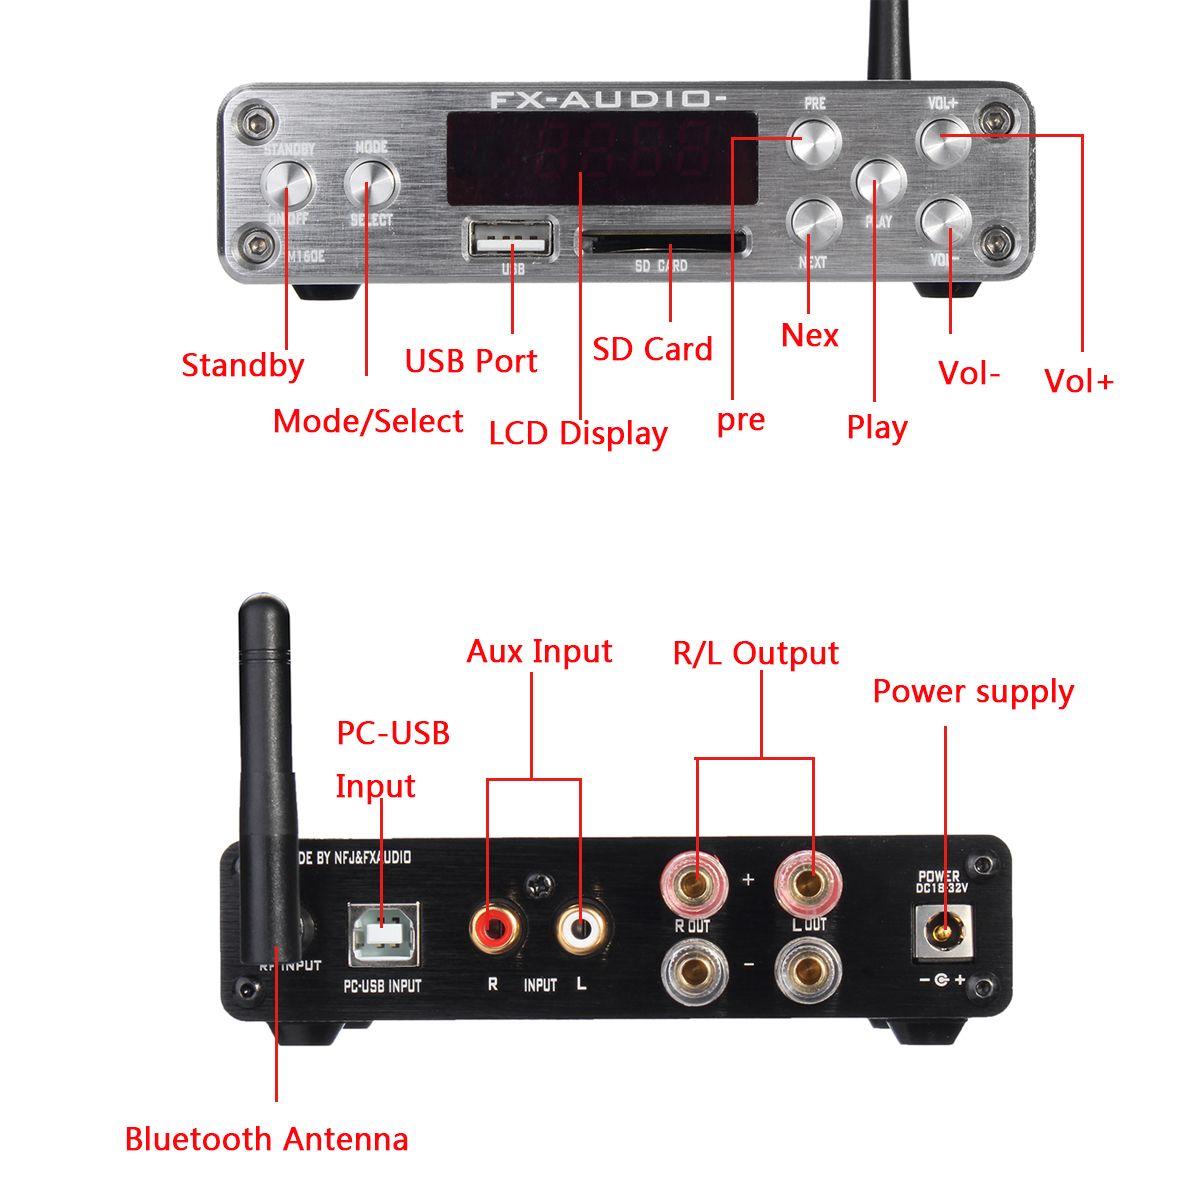 Home-Amplifier-220v-DC-32V-4OHM-2CH-bluetooth-40-Stereo-Amplifier-with-Remote-Control-Support-USB-Di-1269800